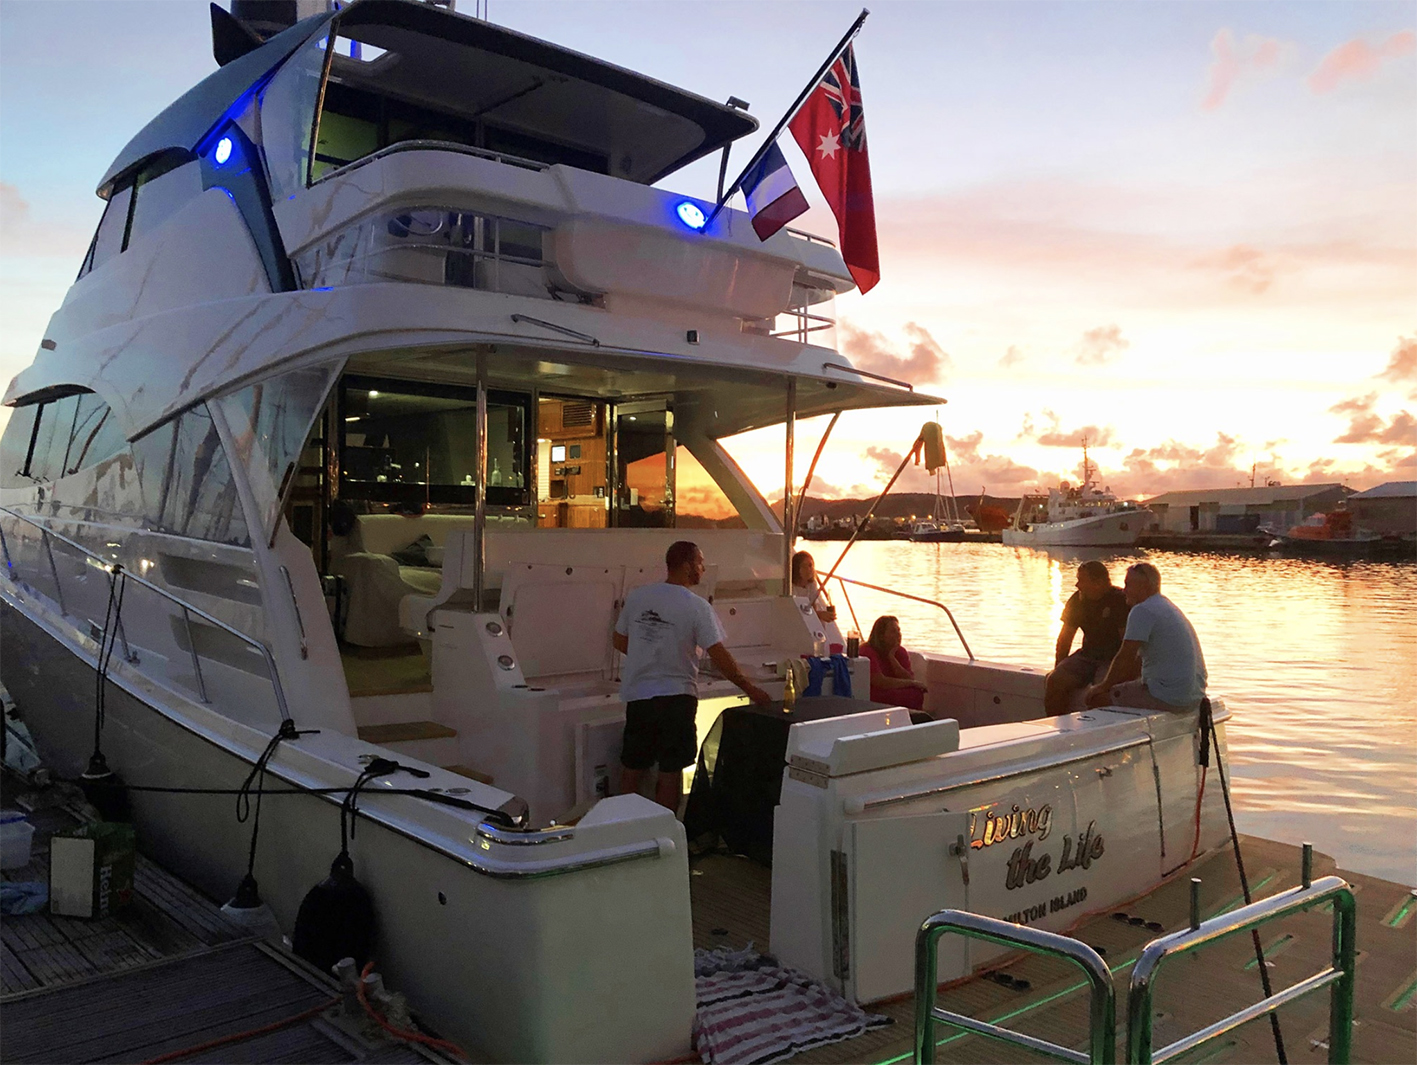 Across the Pacific New Caledonia nights light up the Flemings’ Riviera 68 Sports Motor Yacht